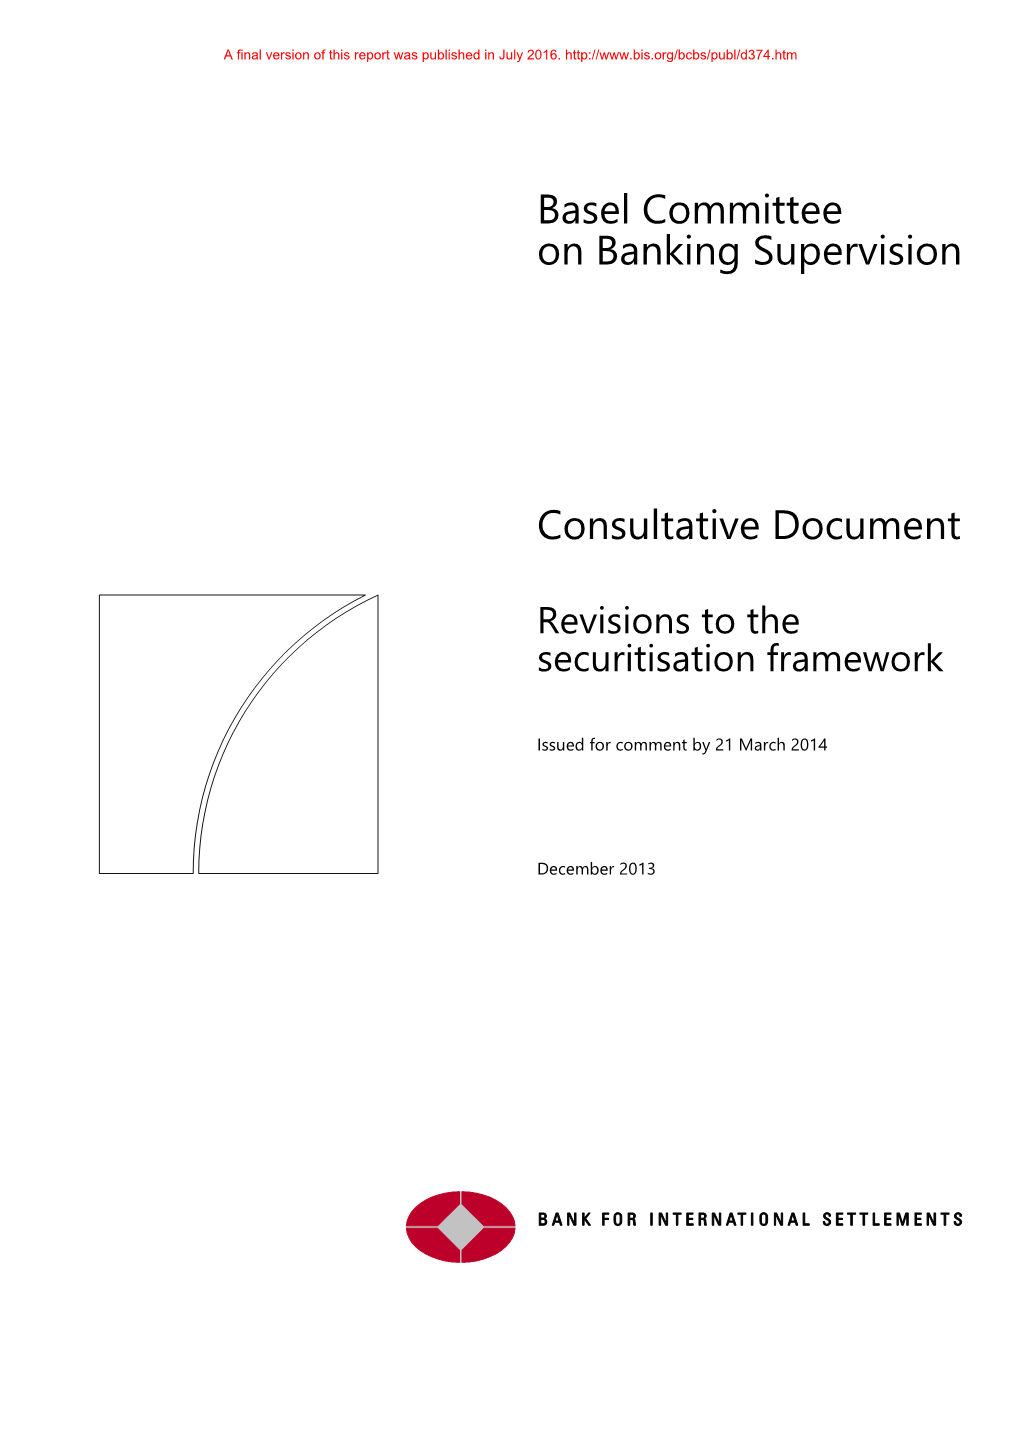 Revisions to the Securitisation Framework